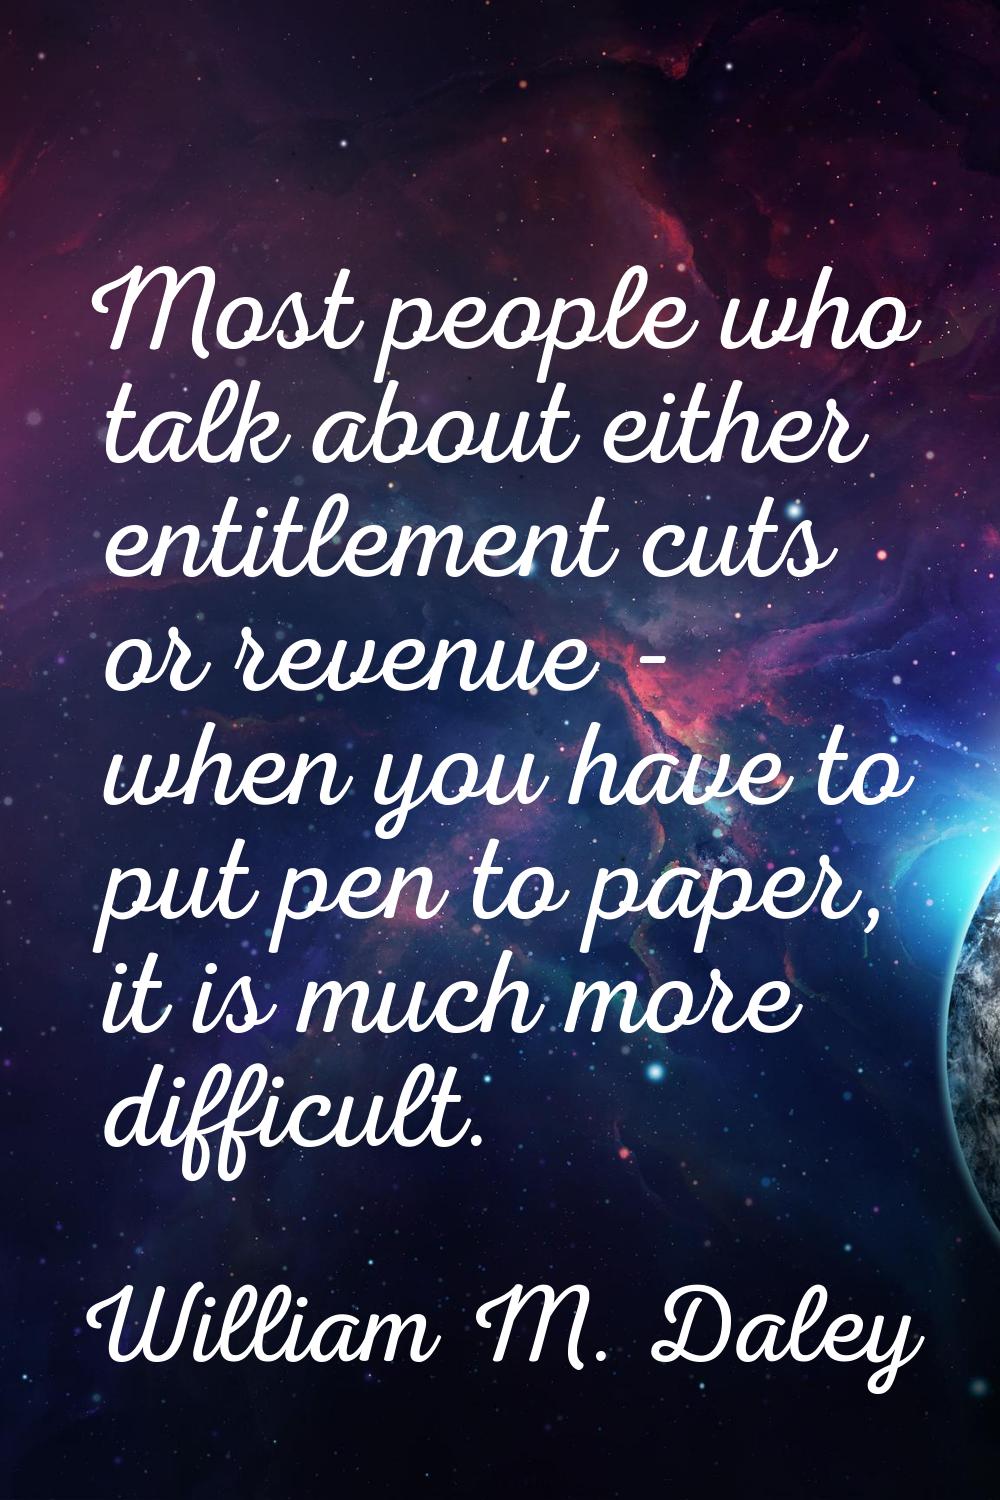 Most people who talk about either entitlement cuts or revenue - when you have to put pen to paper, 